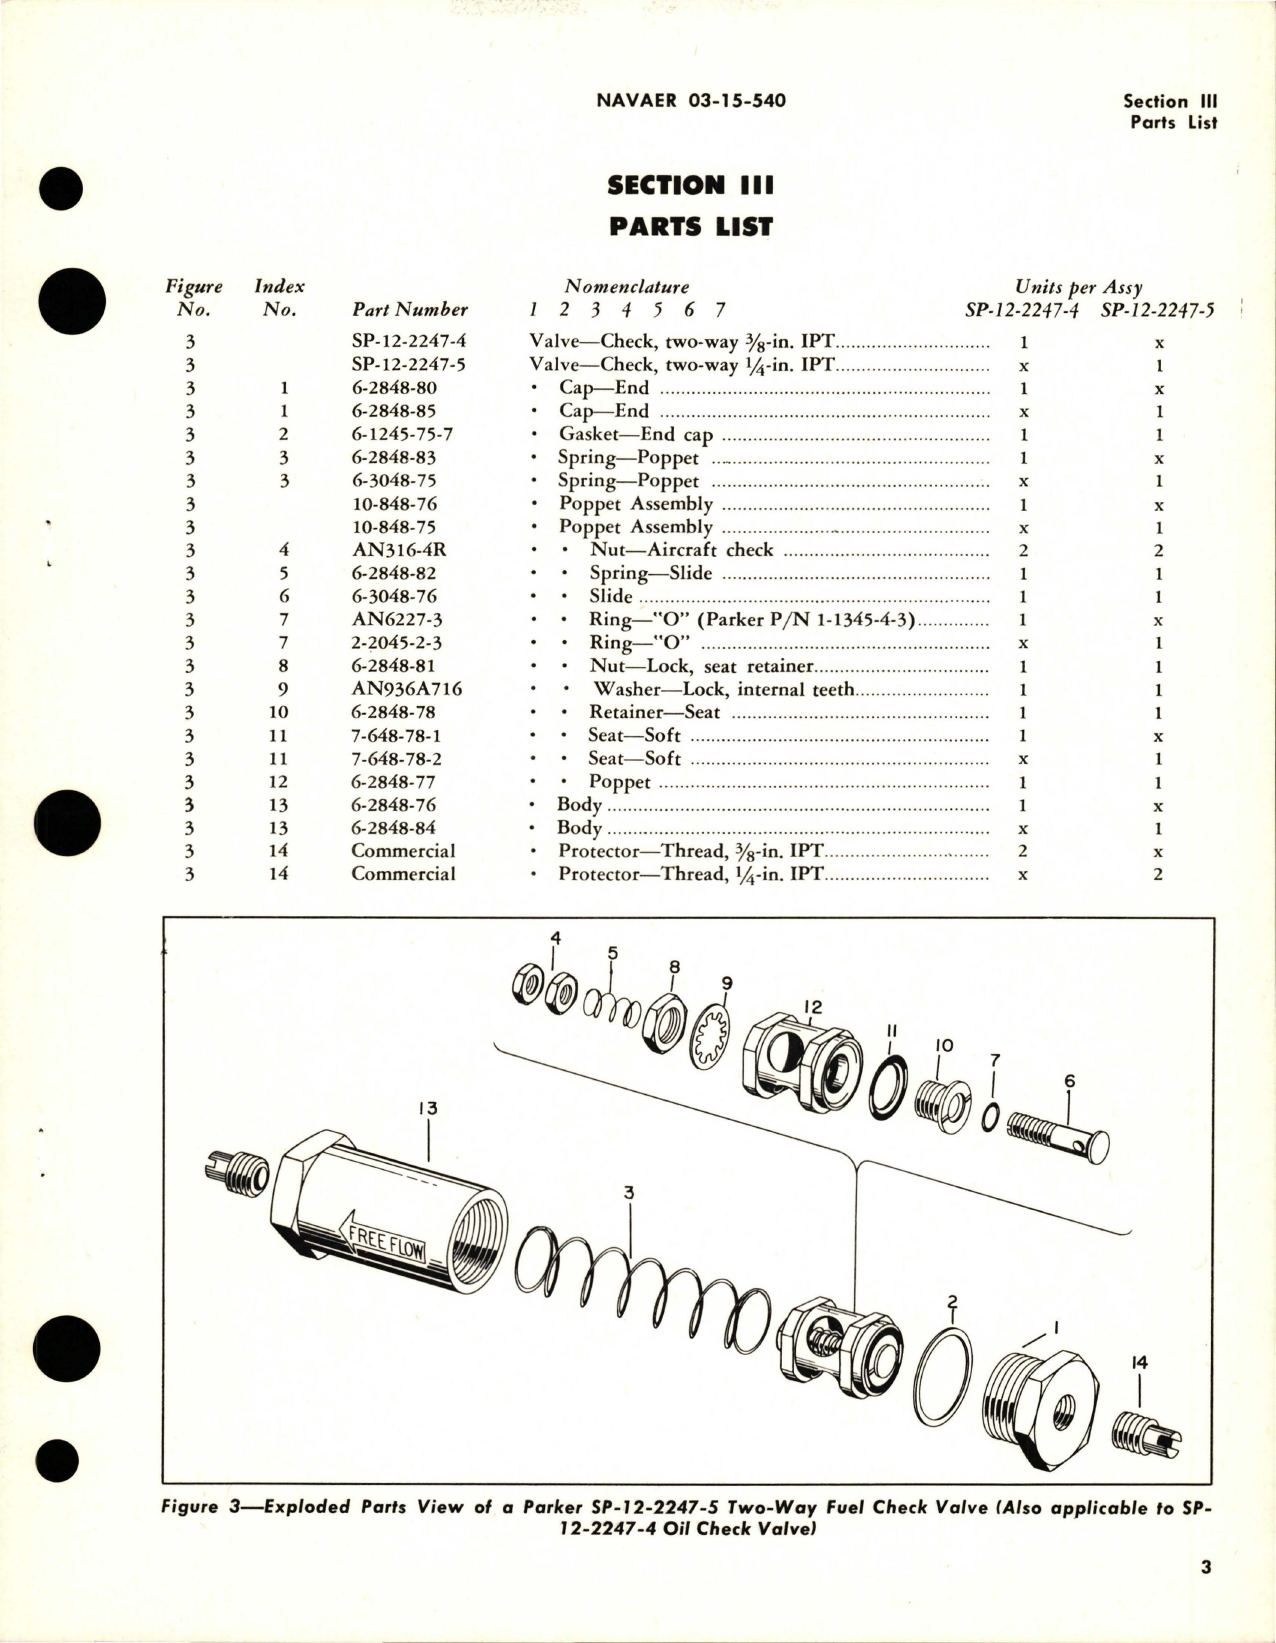 Sample page 5 from AirCorps Library document: Operation, Service and Overhaul Instructions with Parts for Two-Way Oil Check Valve and Two-Way Fuel Check Valve